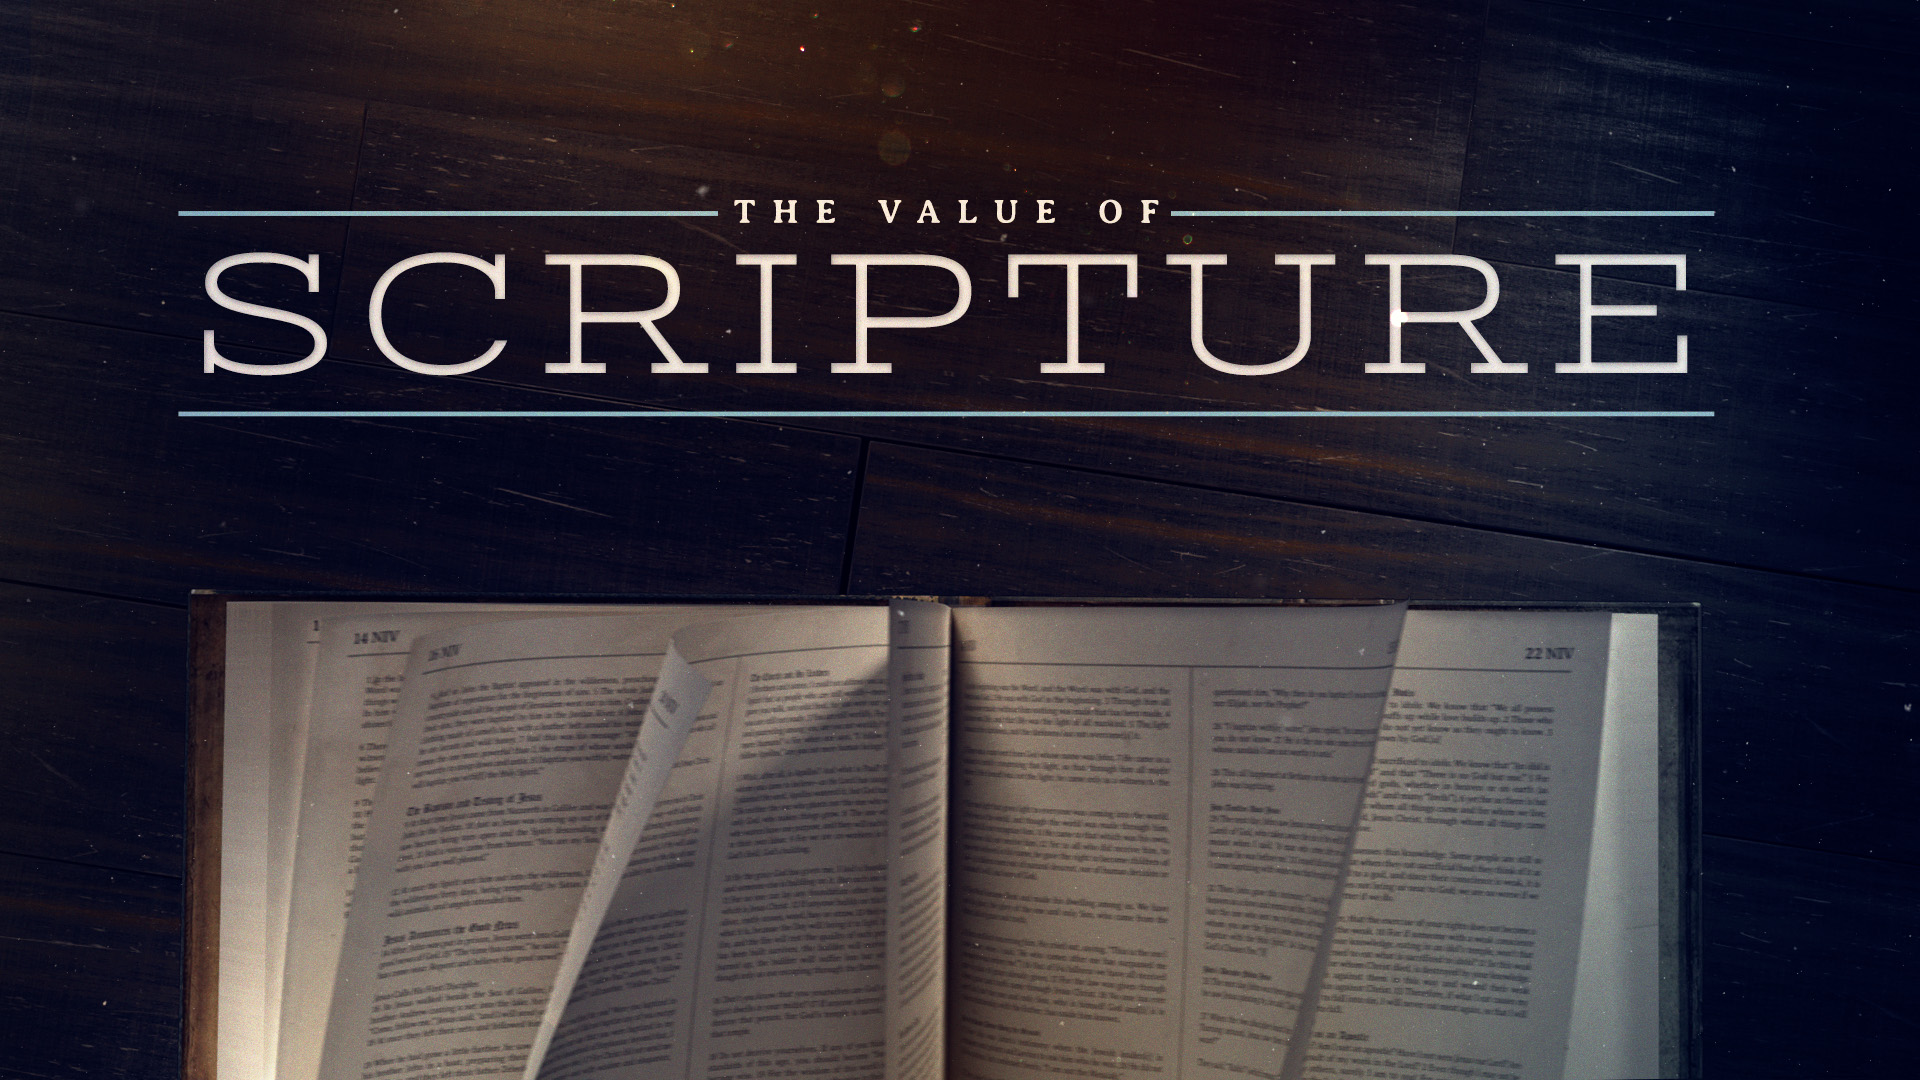 The Value of Scripture